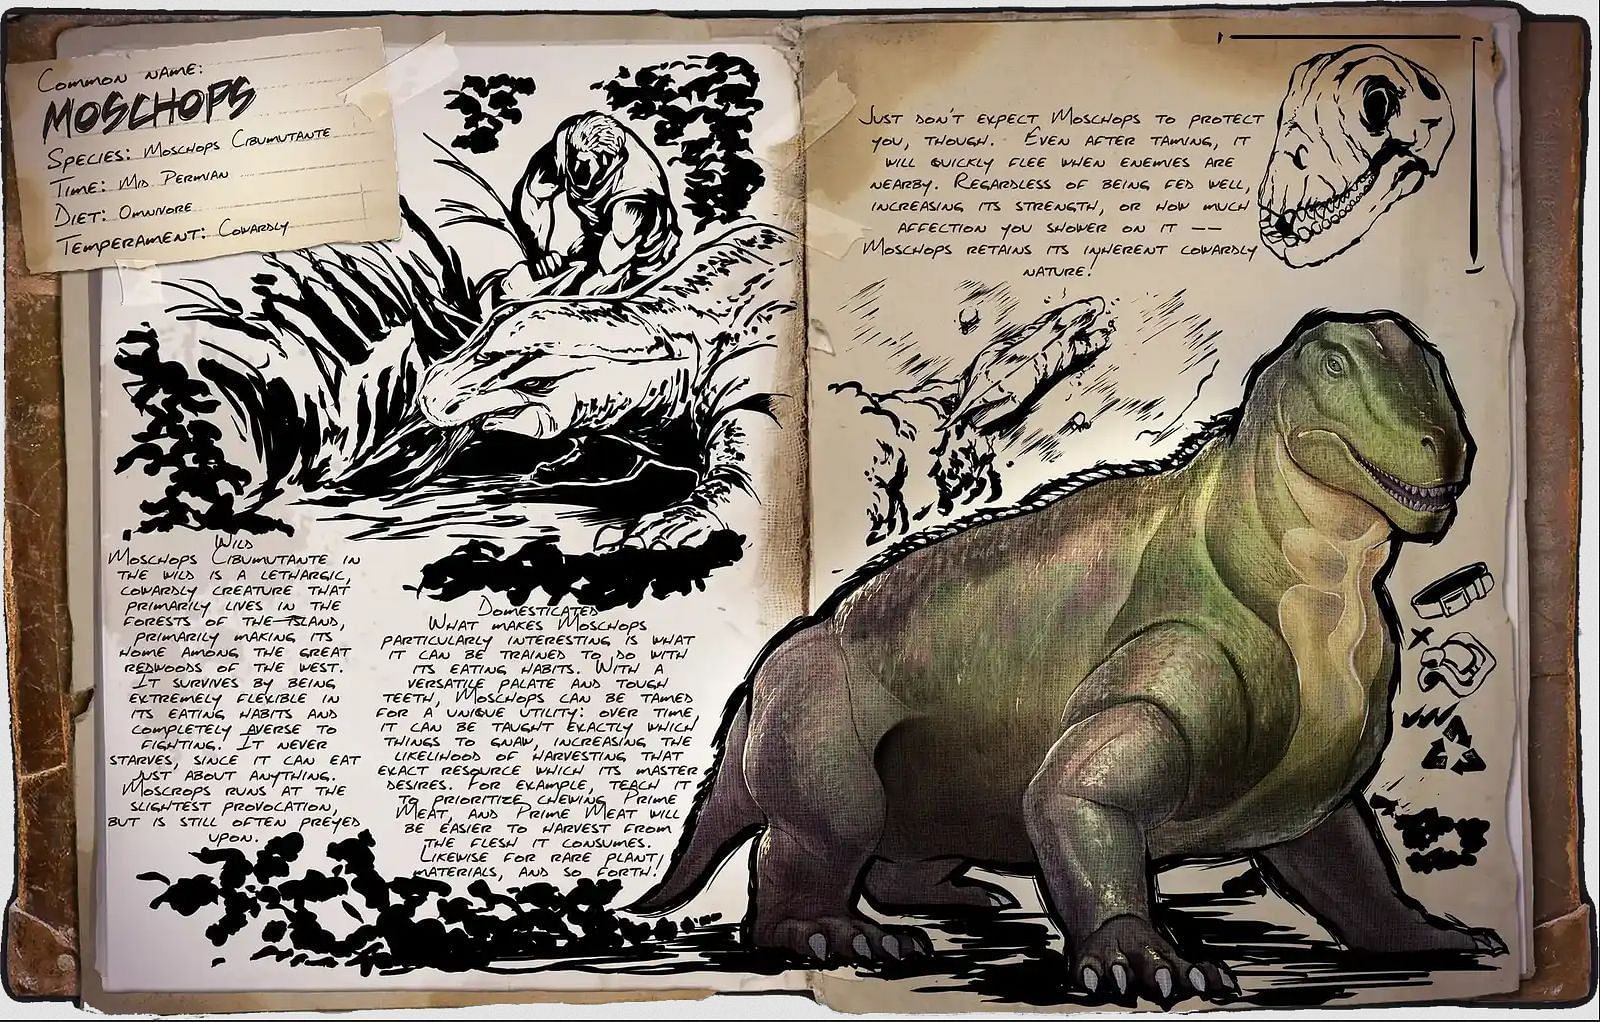 Journal Notes - Moschops (image by Studio Wildcard)